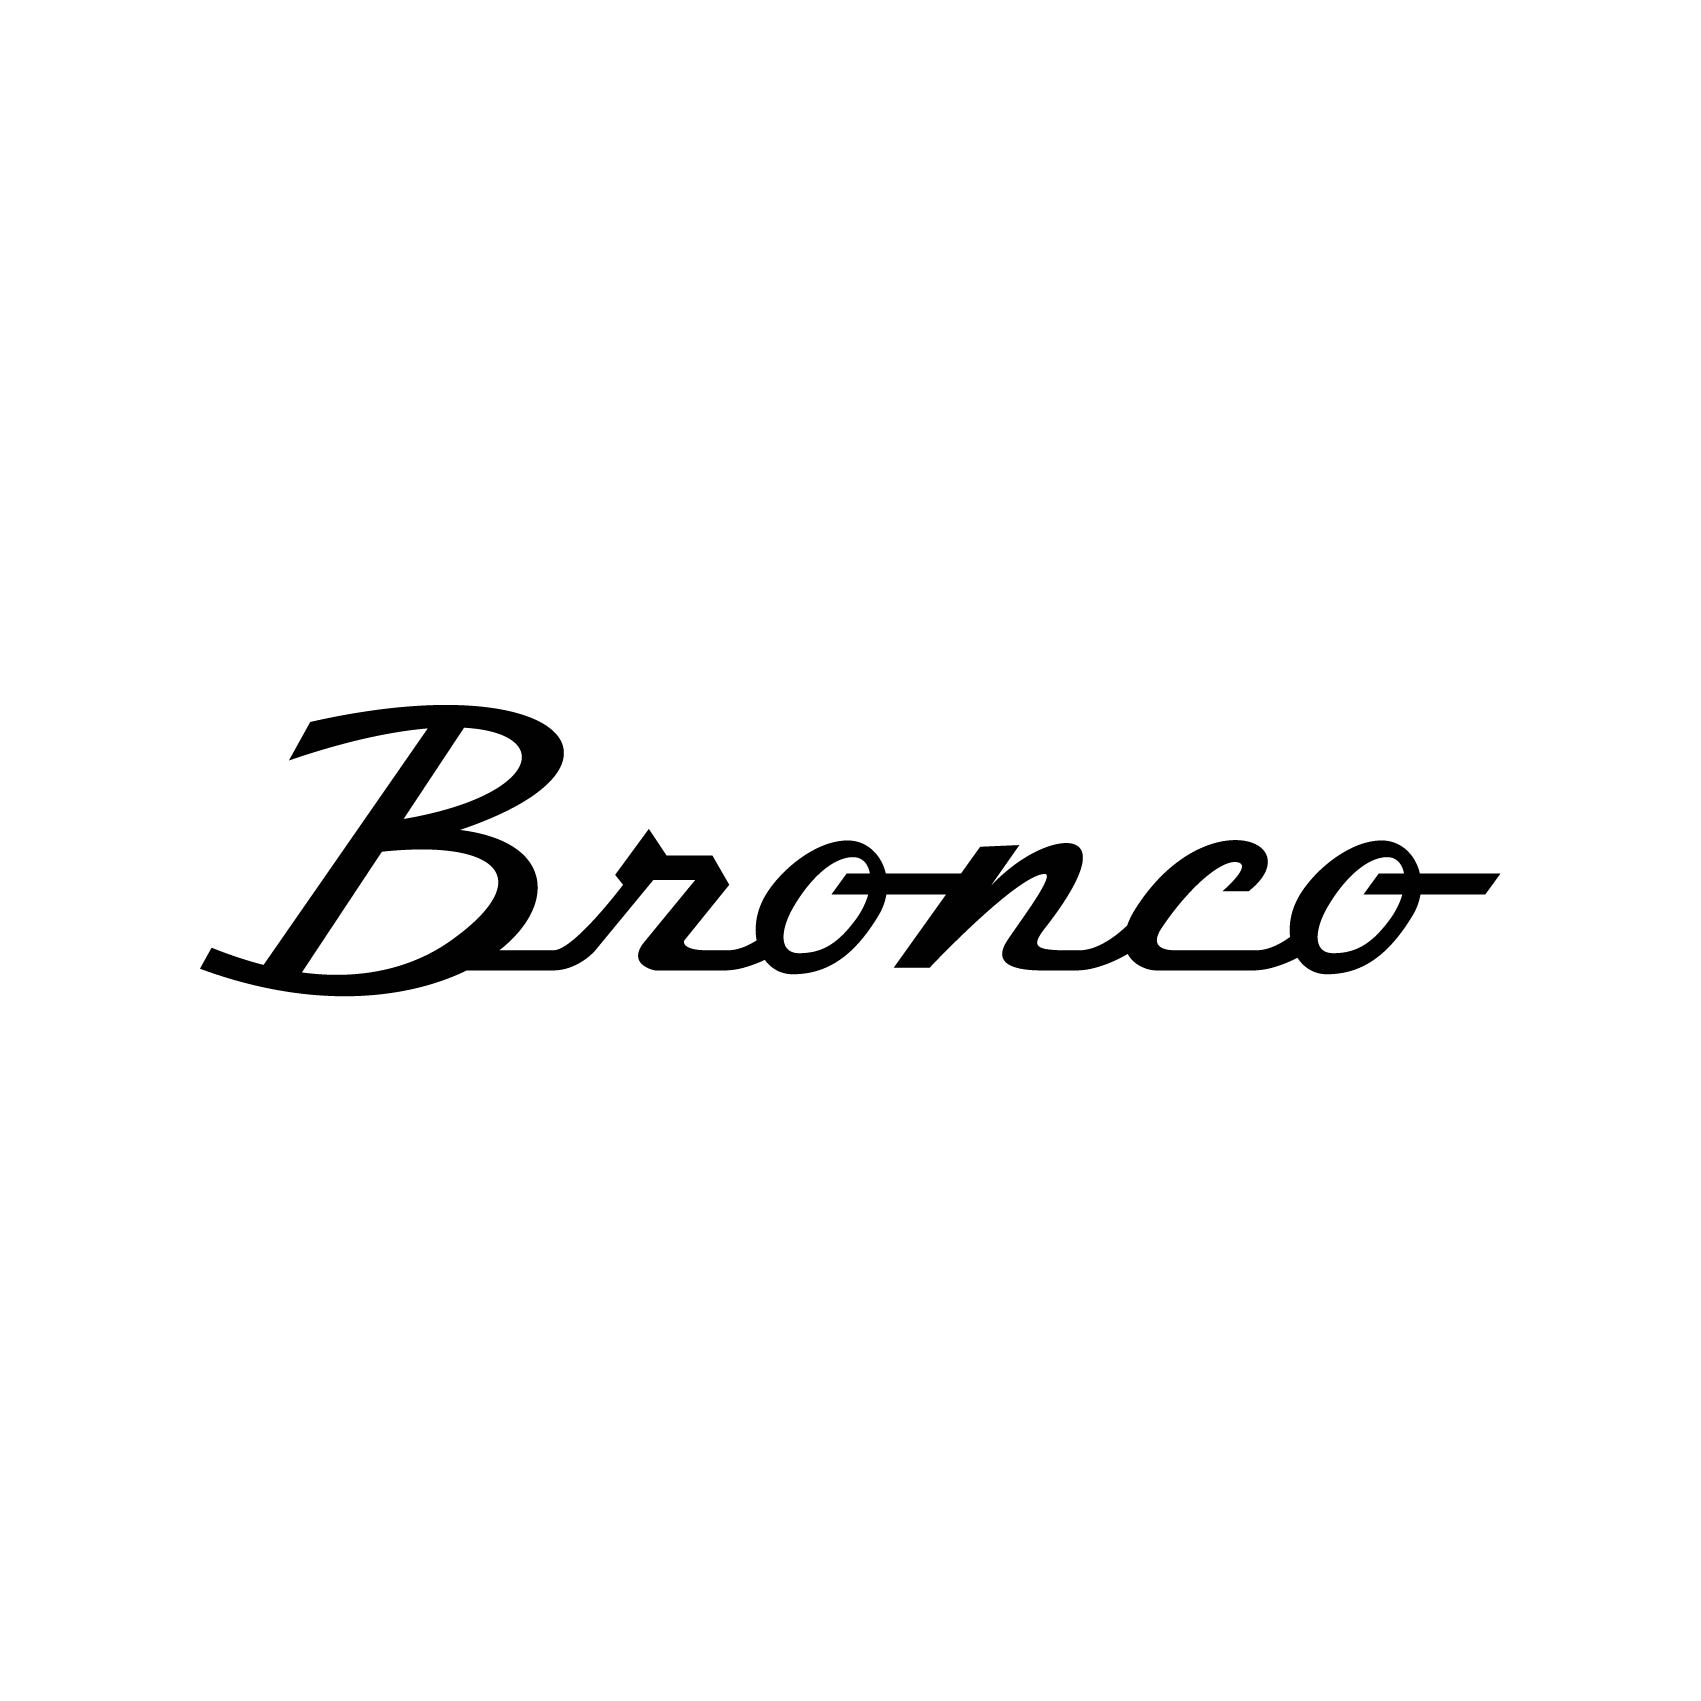 stickers-ford-bronco-ref8ford4x4-autocollant-ford-4x4-sticker-pour-tout-terrain-off-road